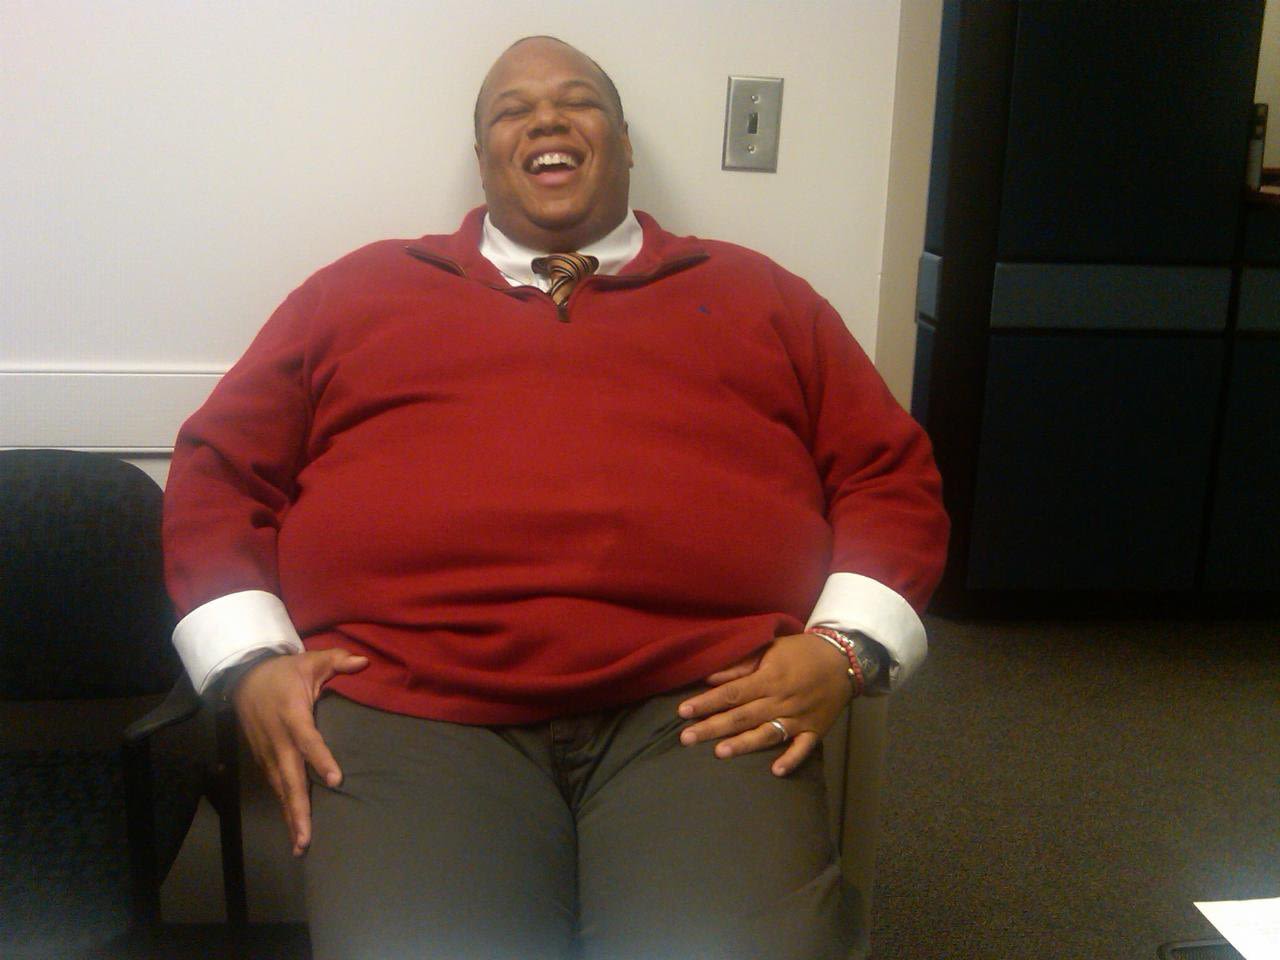 At the beginning of 2011, Marlon Gibson weighed 405 pounds.  He was sitting in a friend's office and said, "You need to get bigger chairs." "Actually, I think you need to think about that," she said.  He says they laugh about it now, but it was painful at the time.